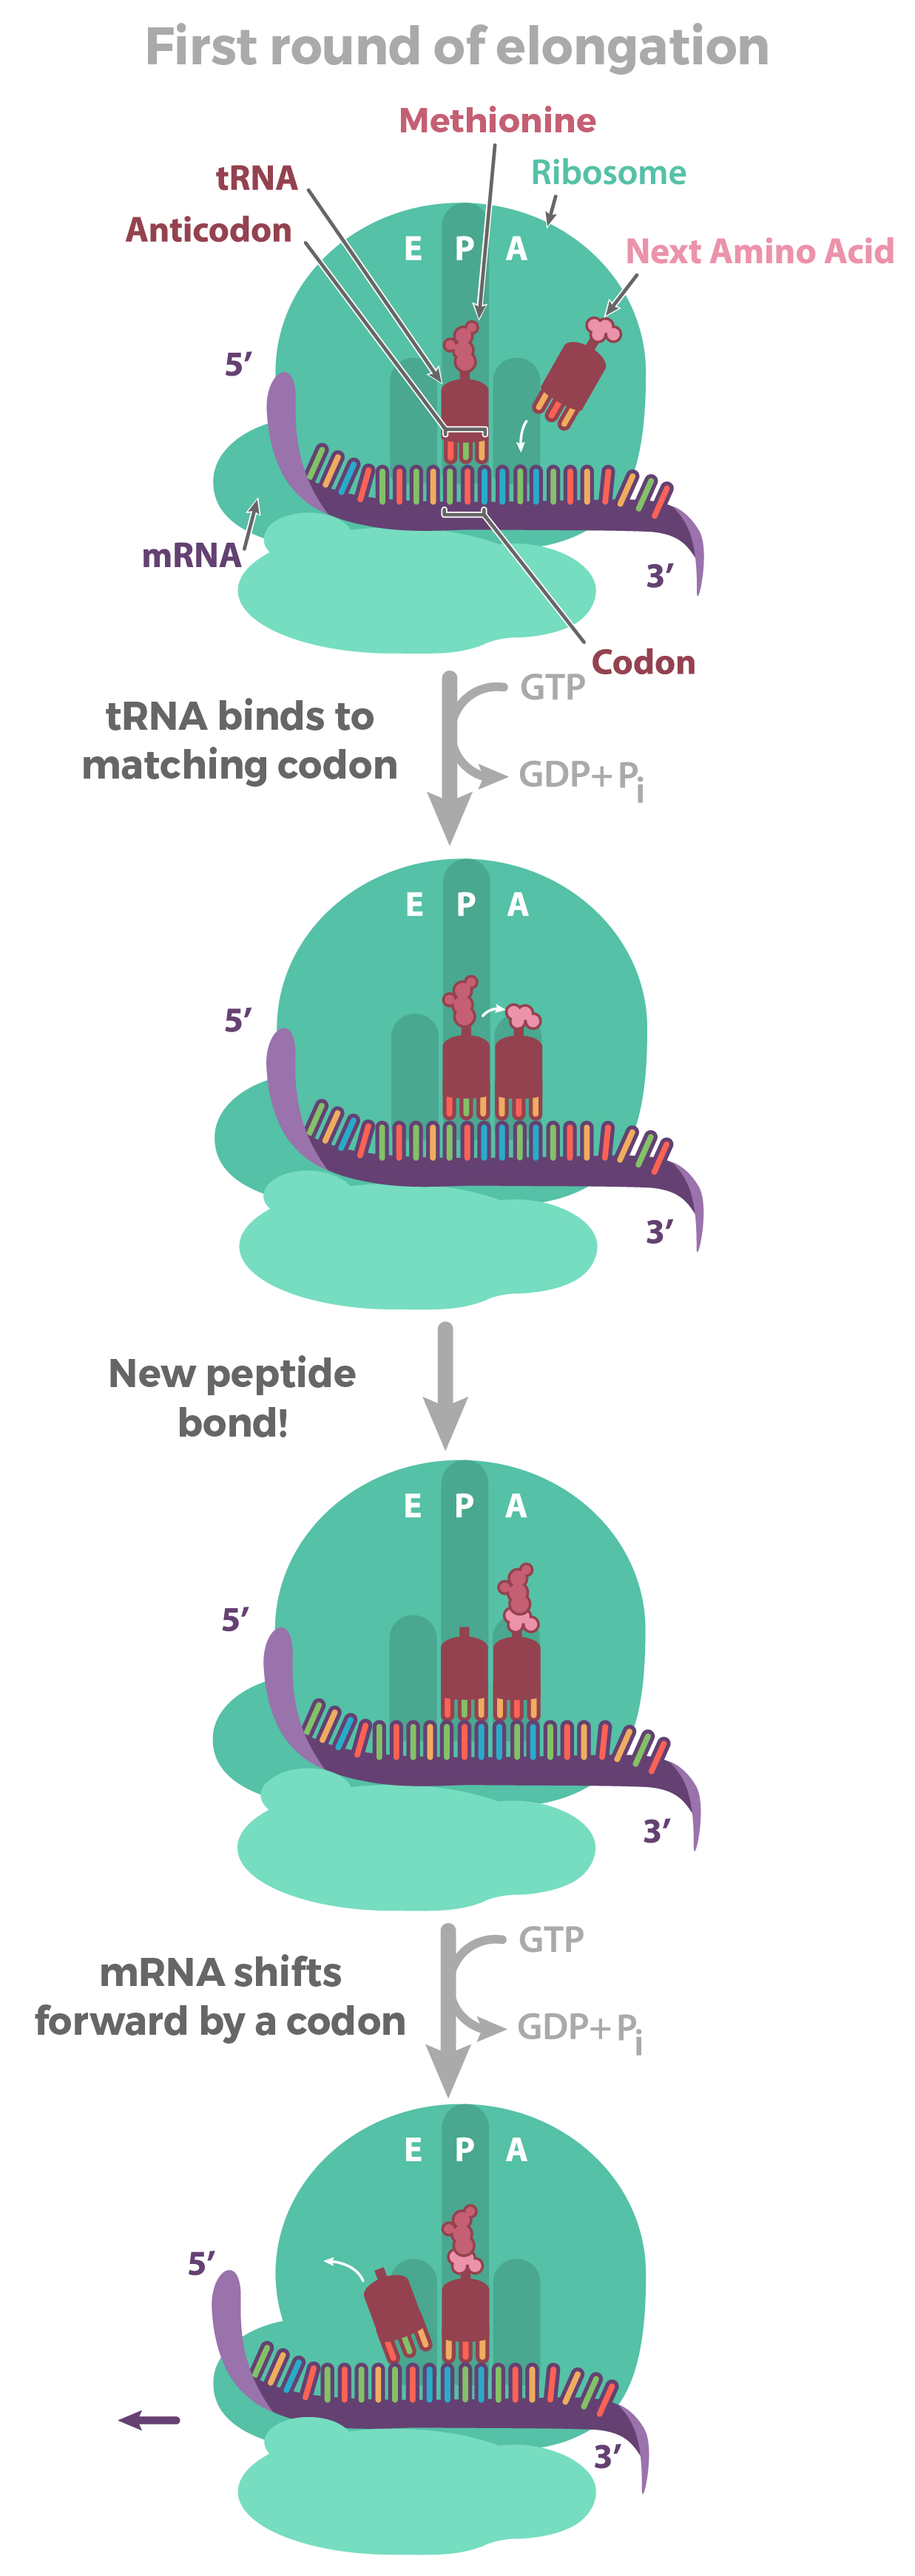  In the first round of elongation, an incoming amino acid attaches to methionine already present in the ribosome's P site. This action initiates the growth of a polypeptide. The three steps of this first round of elongation are described below.

1) Codon recognition: an incoming tRNA with an anticodon that is complementary to the codon exposed in the A site binds to the mRNA. Energy from GTP is expended to increase the accuracy of codon recognition.

2) Peptide bond formation: a peptide bond is formed between the incoming amino acid (carried by a tRNA in the A site) and methionine (a tRNA charged with methionine attached to the P site during initiation). This action passes the polypeptide (the two bonded amino acids) from the tRNA in the P site to the tRNA in the A site. The tRNA in the P site is now "empty" because it does not hold the polypeptide.

3) Translocation: the ribosome moves one codon over on the mRNA toward the 3' end. This shifts the tRNA in the A site to the P site, and the tRNA in the P site to the E site. The     empty tRNA in the E site then exits the ribosome.